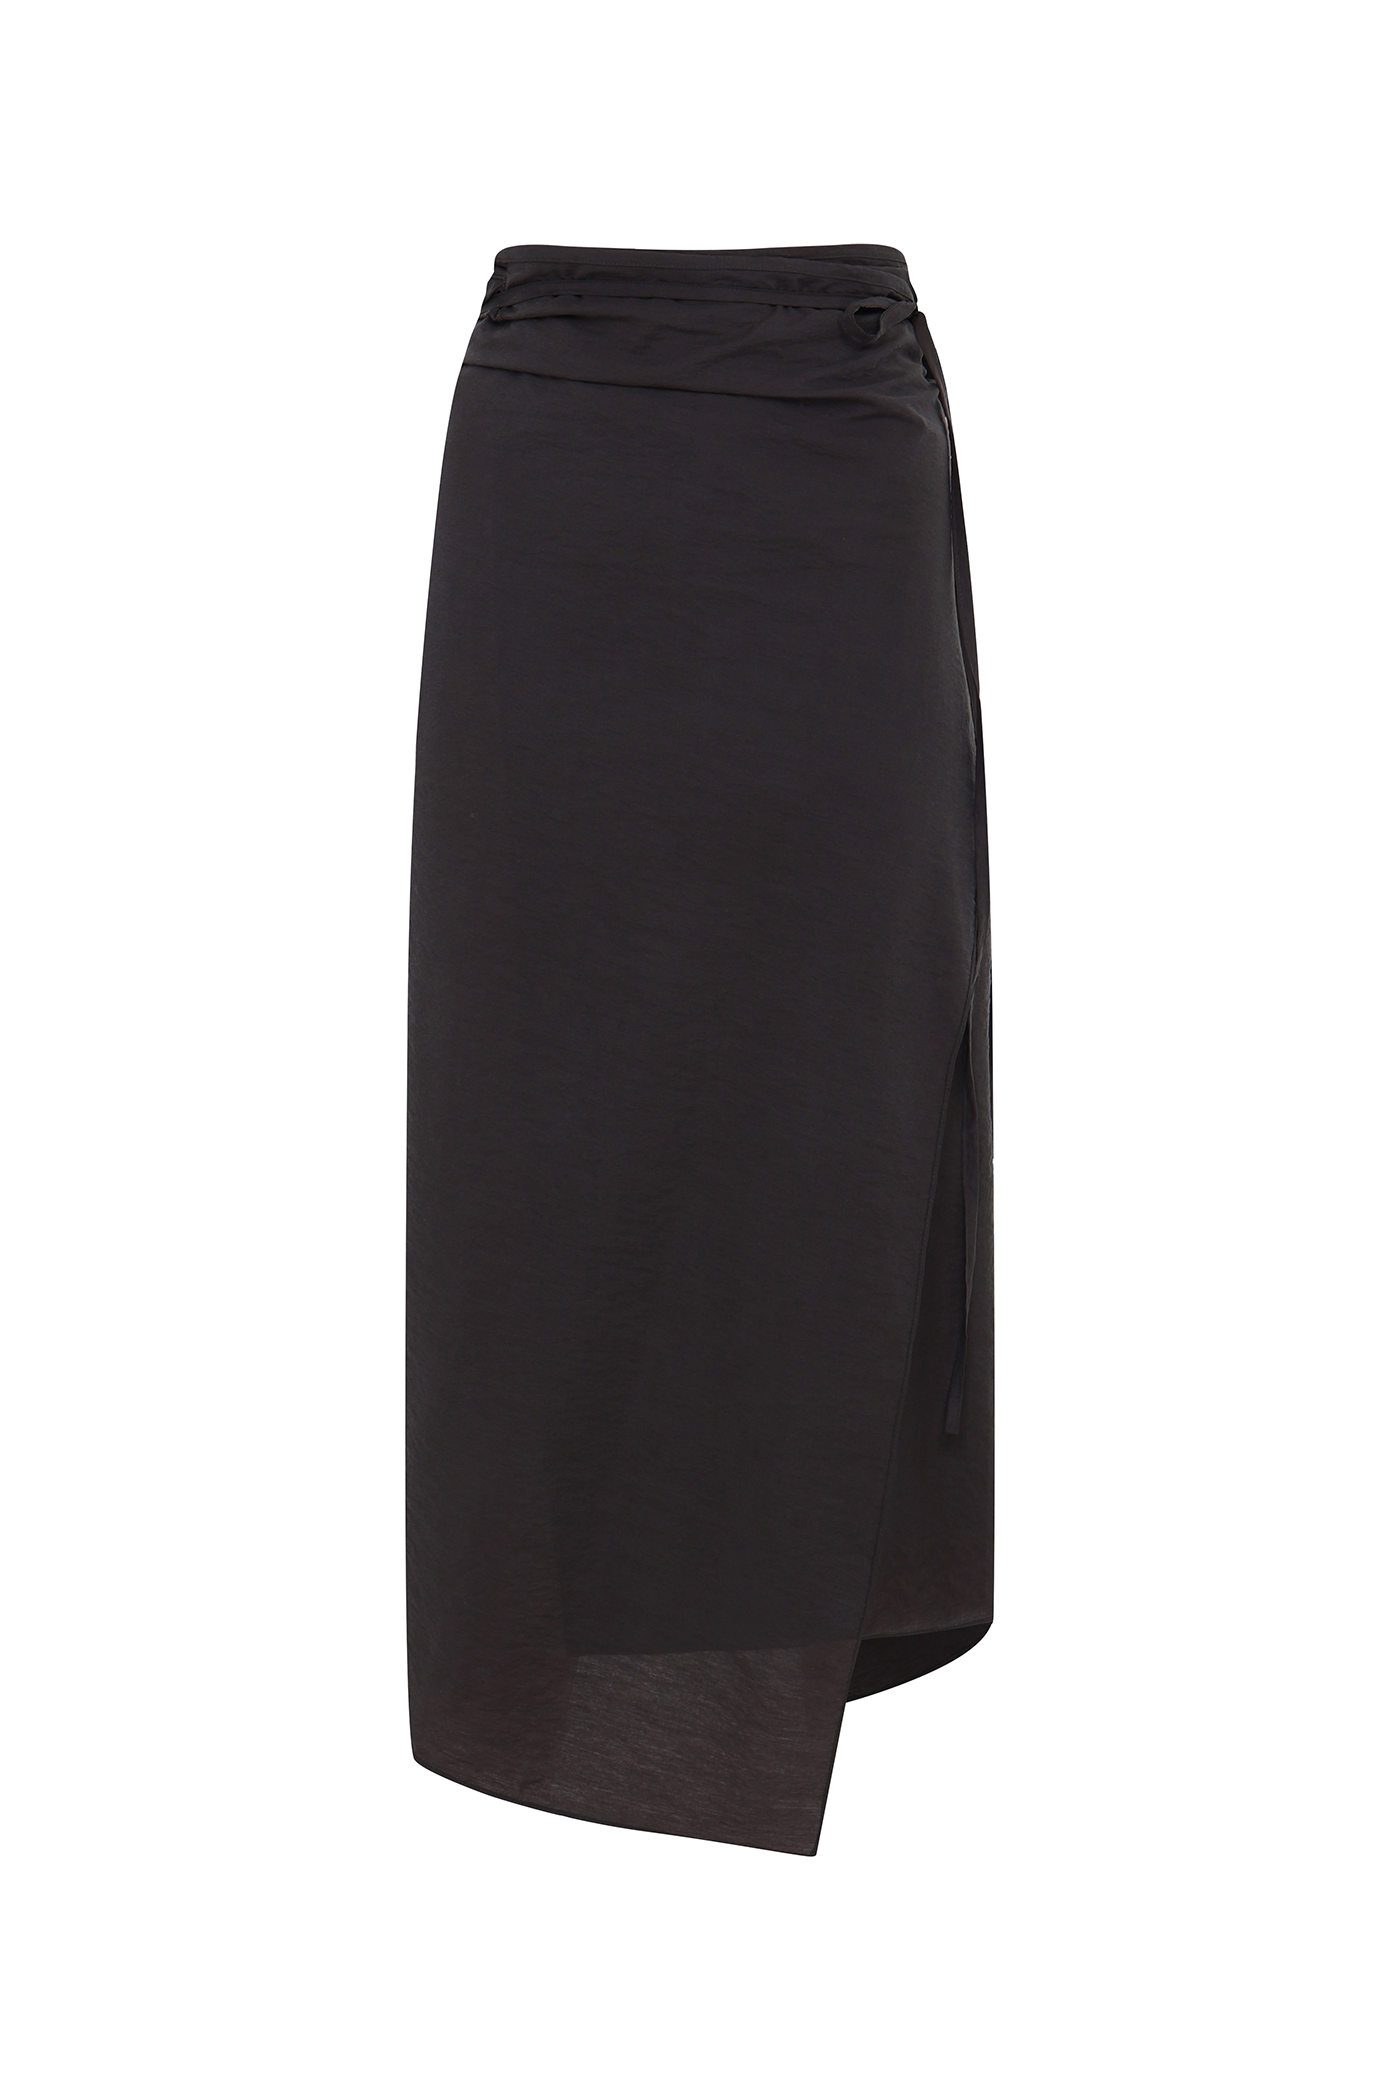 Layered Wrinkle Skirt[LMBCAUSK406]-3color